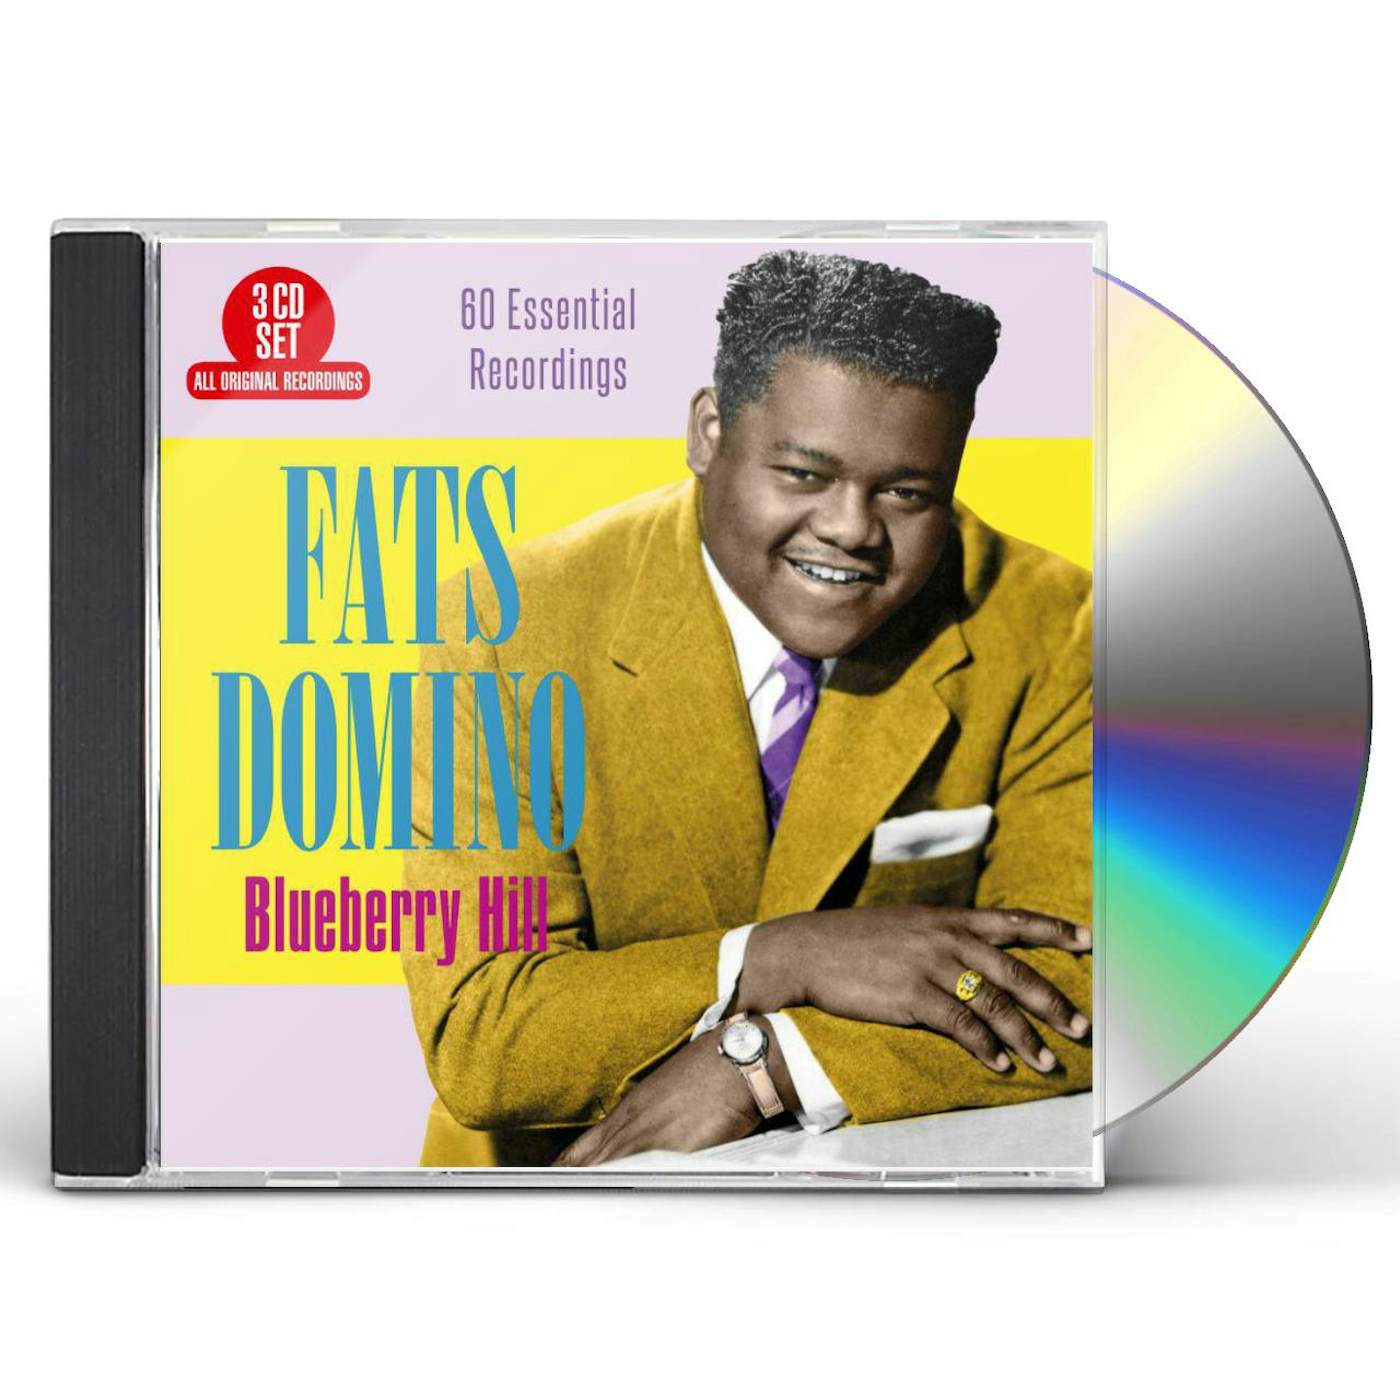 Fats Domino BLUEBERRY HILL: 60 ESSENTIAL RECORDINGS CD